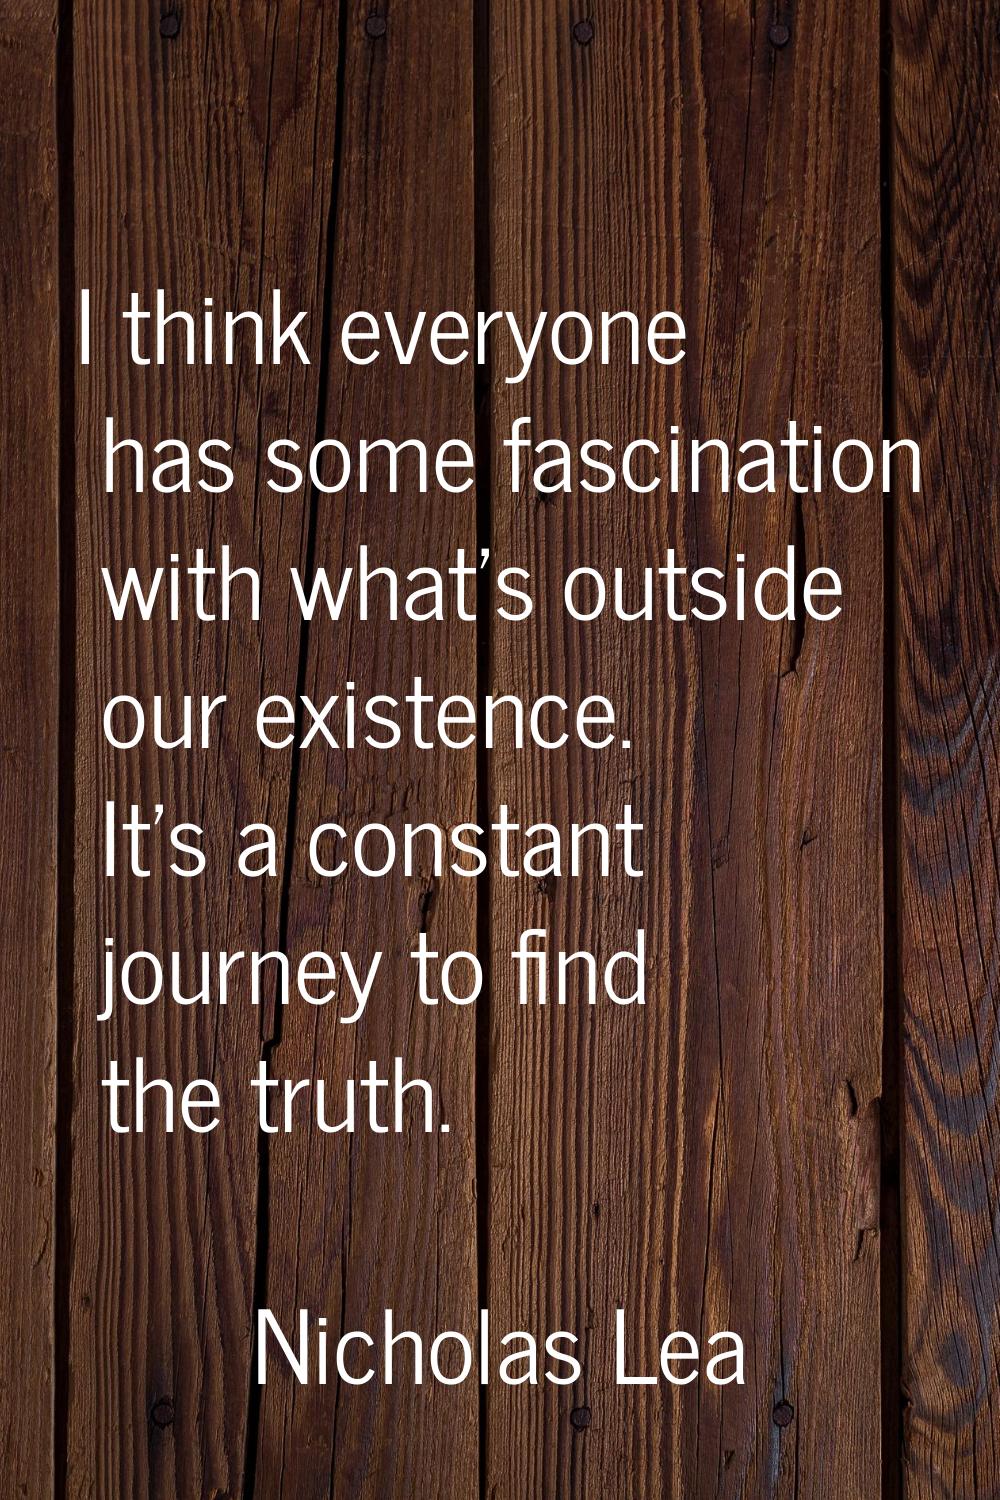 I think everyone has some fascination with what's outside our existence. It's a constant journey to